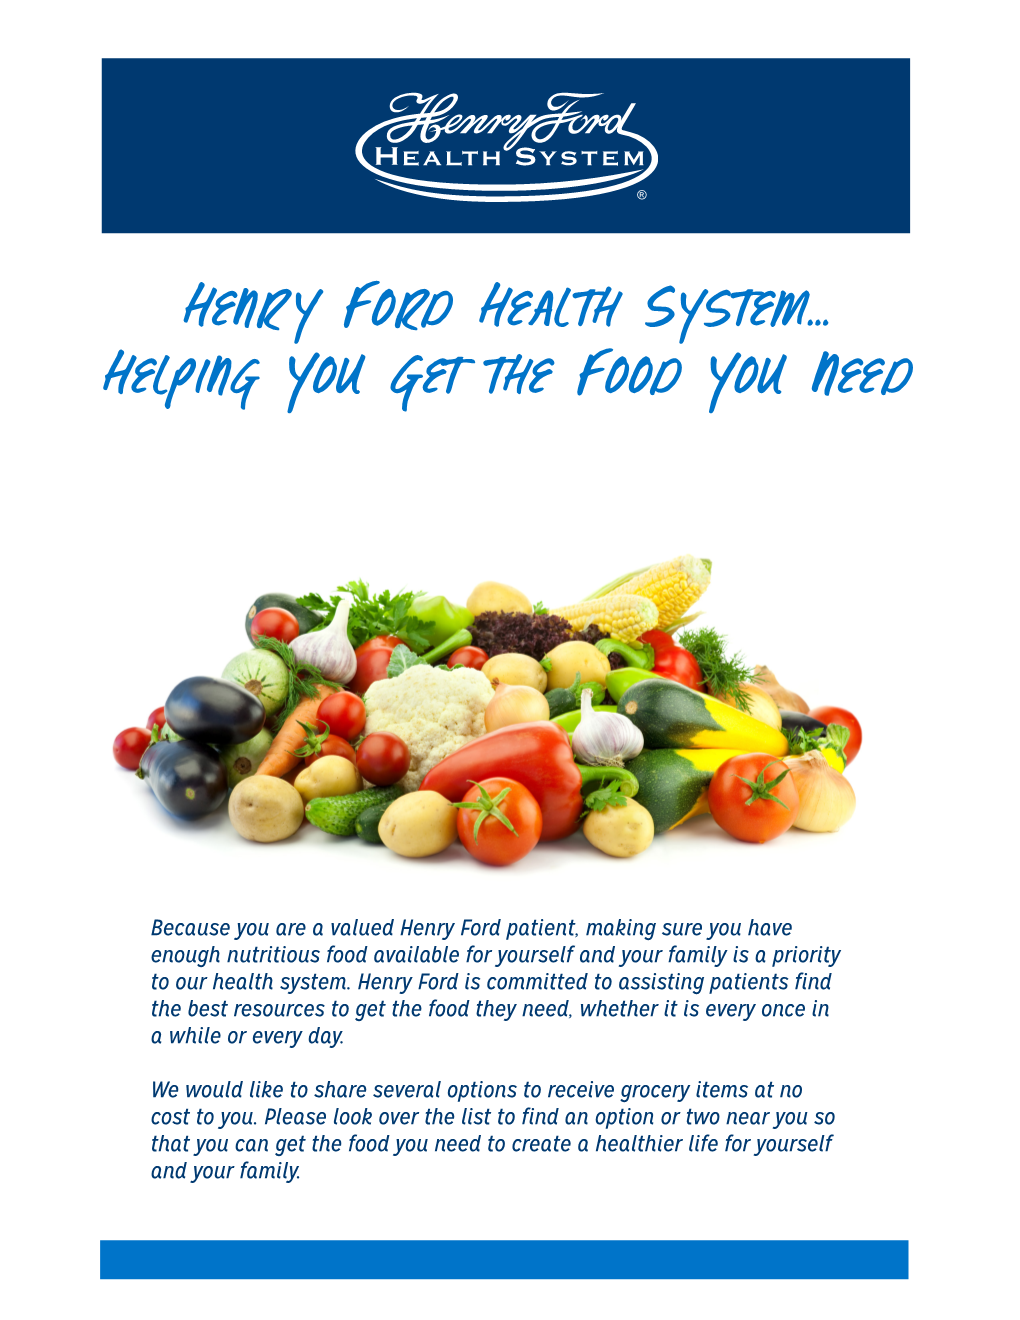 Henr Y Ford Health System… Helping You Get the Food You Need